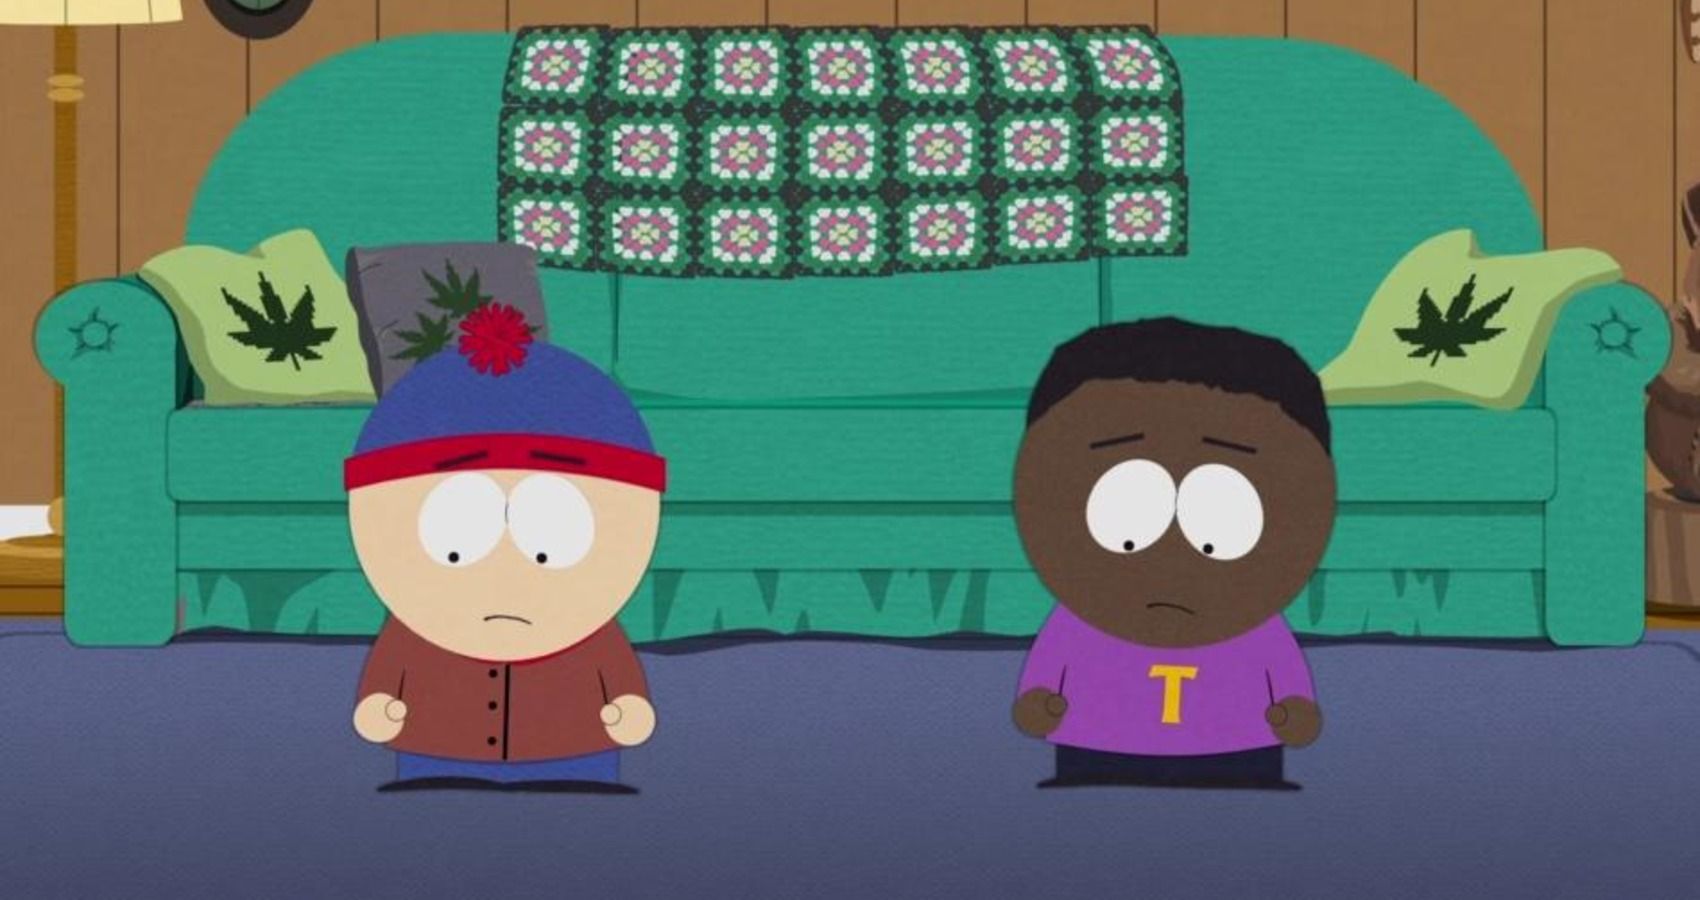 south park stan and token standing in front of a couch 